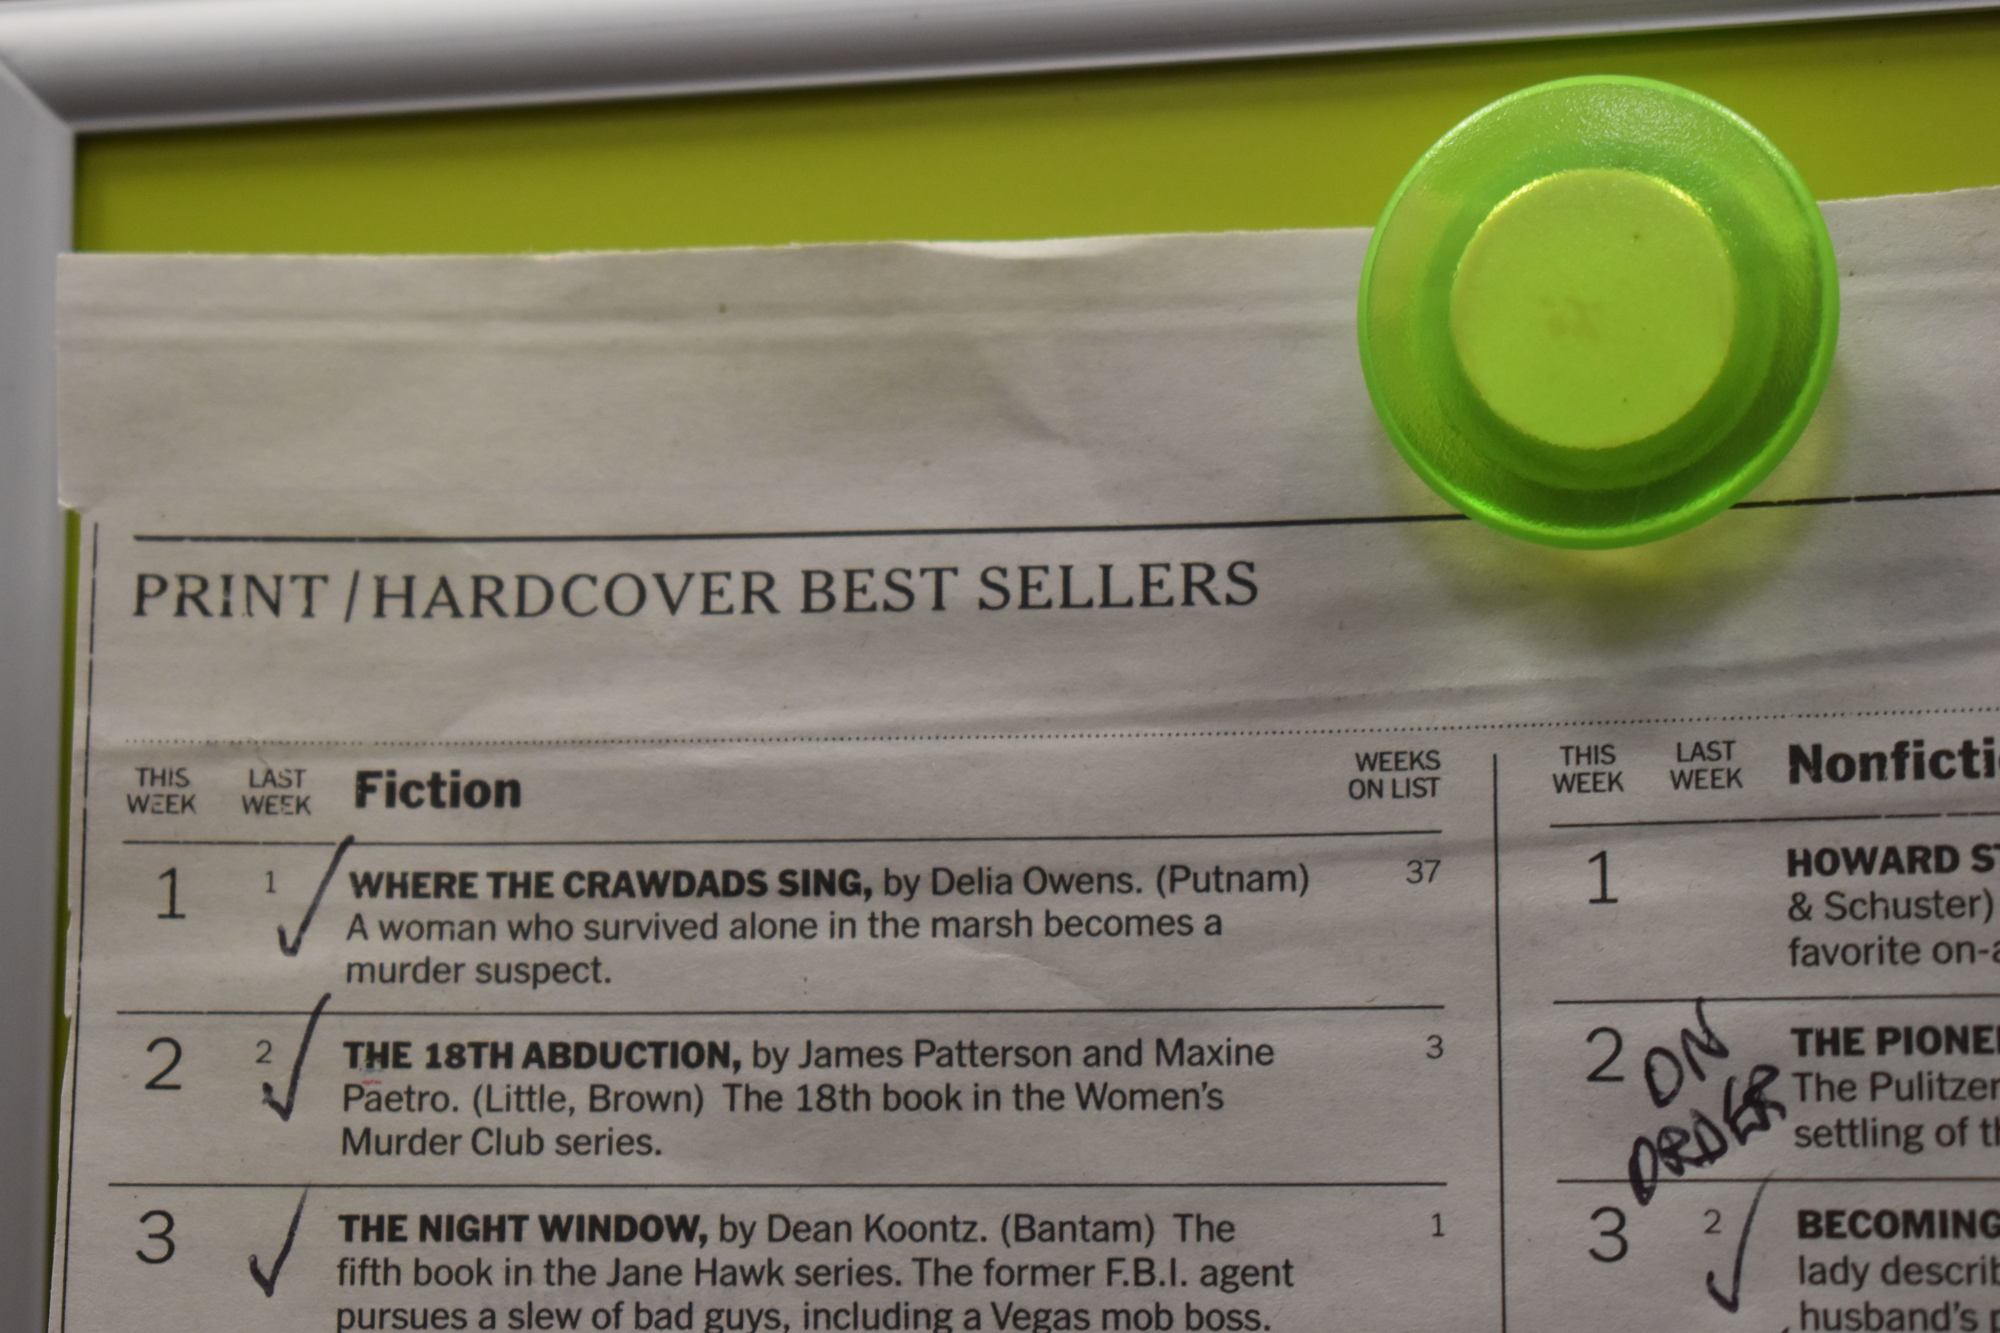 The library tries to buy all the New York Times bestsellers and keeps a list in the building.